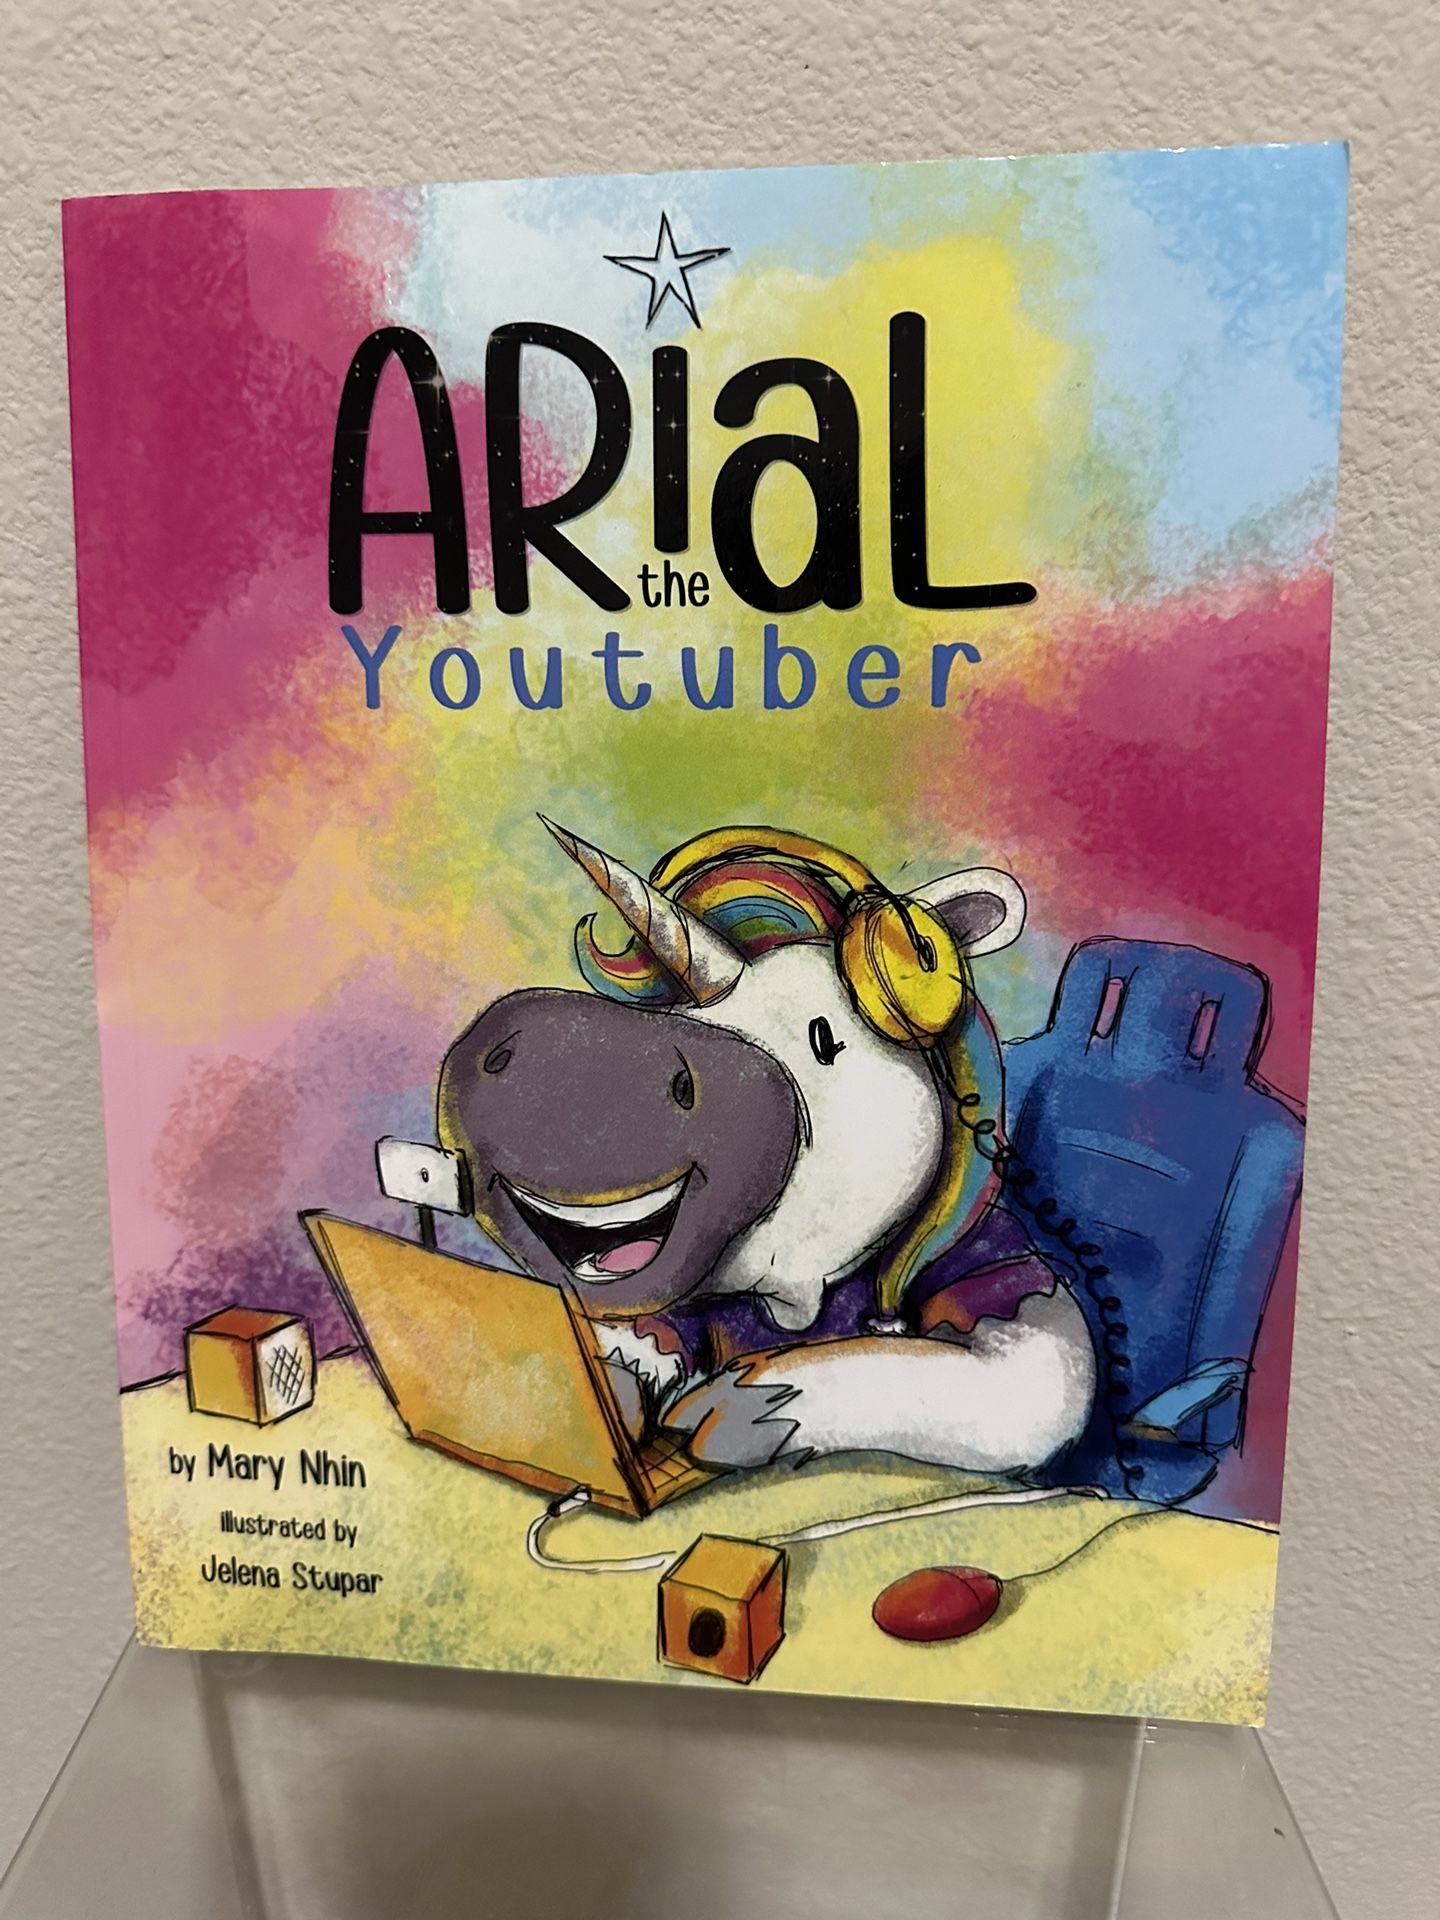 Ariel The YouTuber book